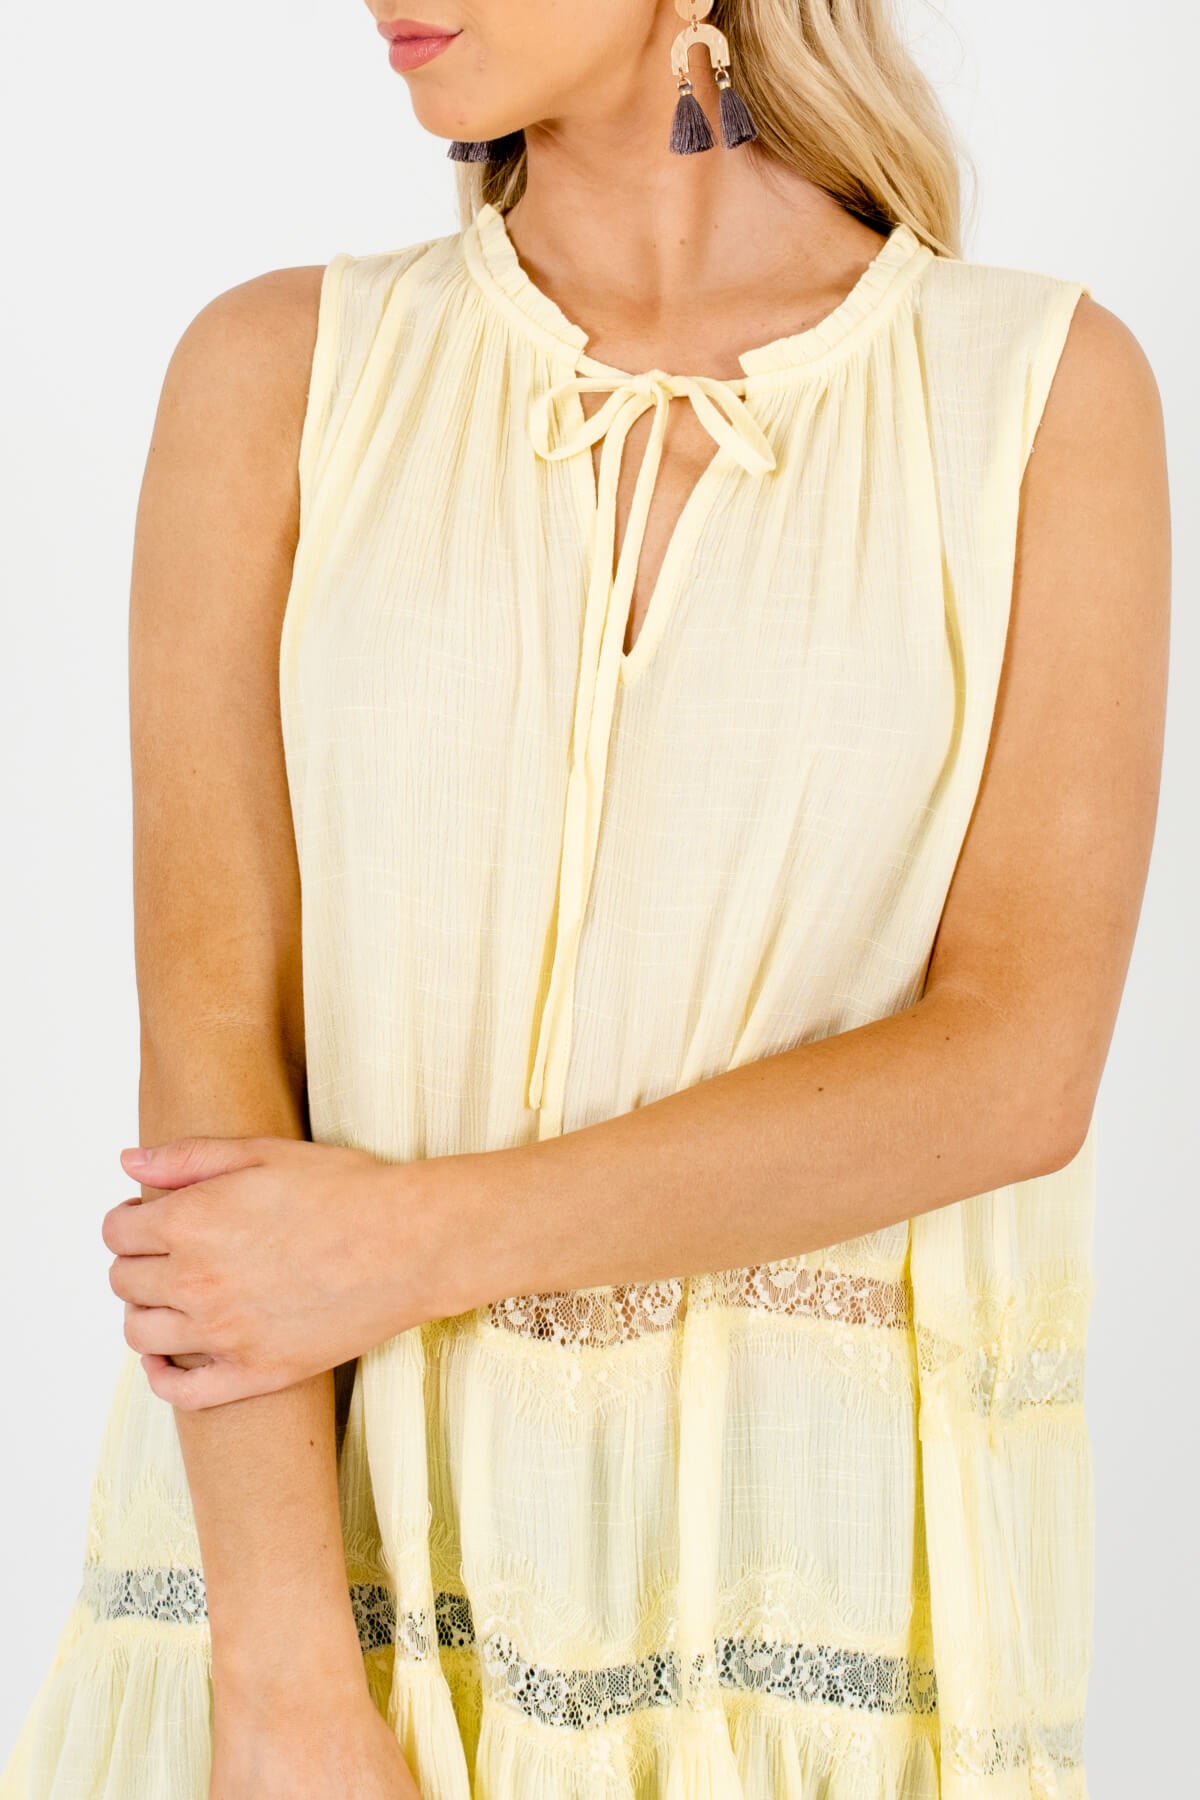 Yellow Peasant Eyelash Lace Tank Tops Affordable Online Boutique